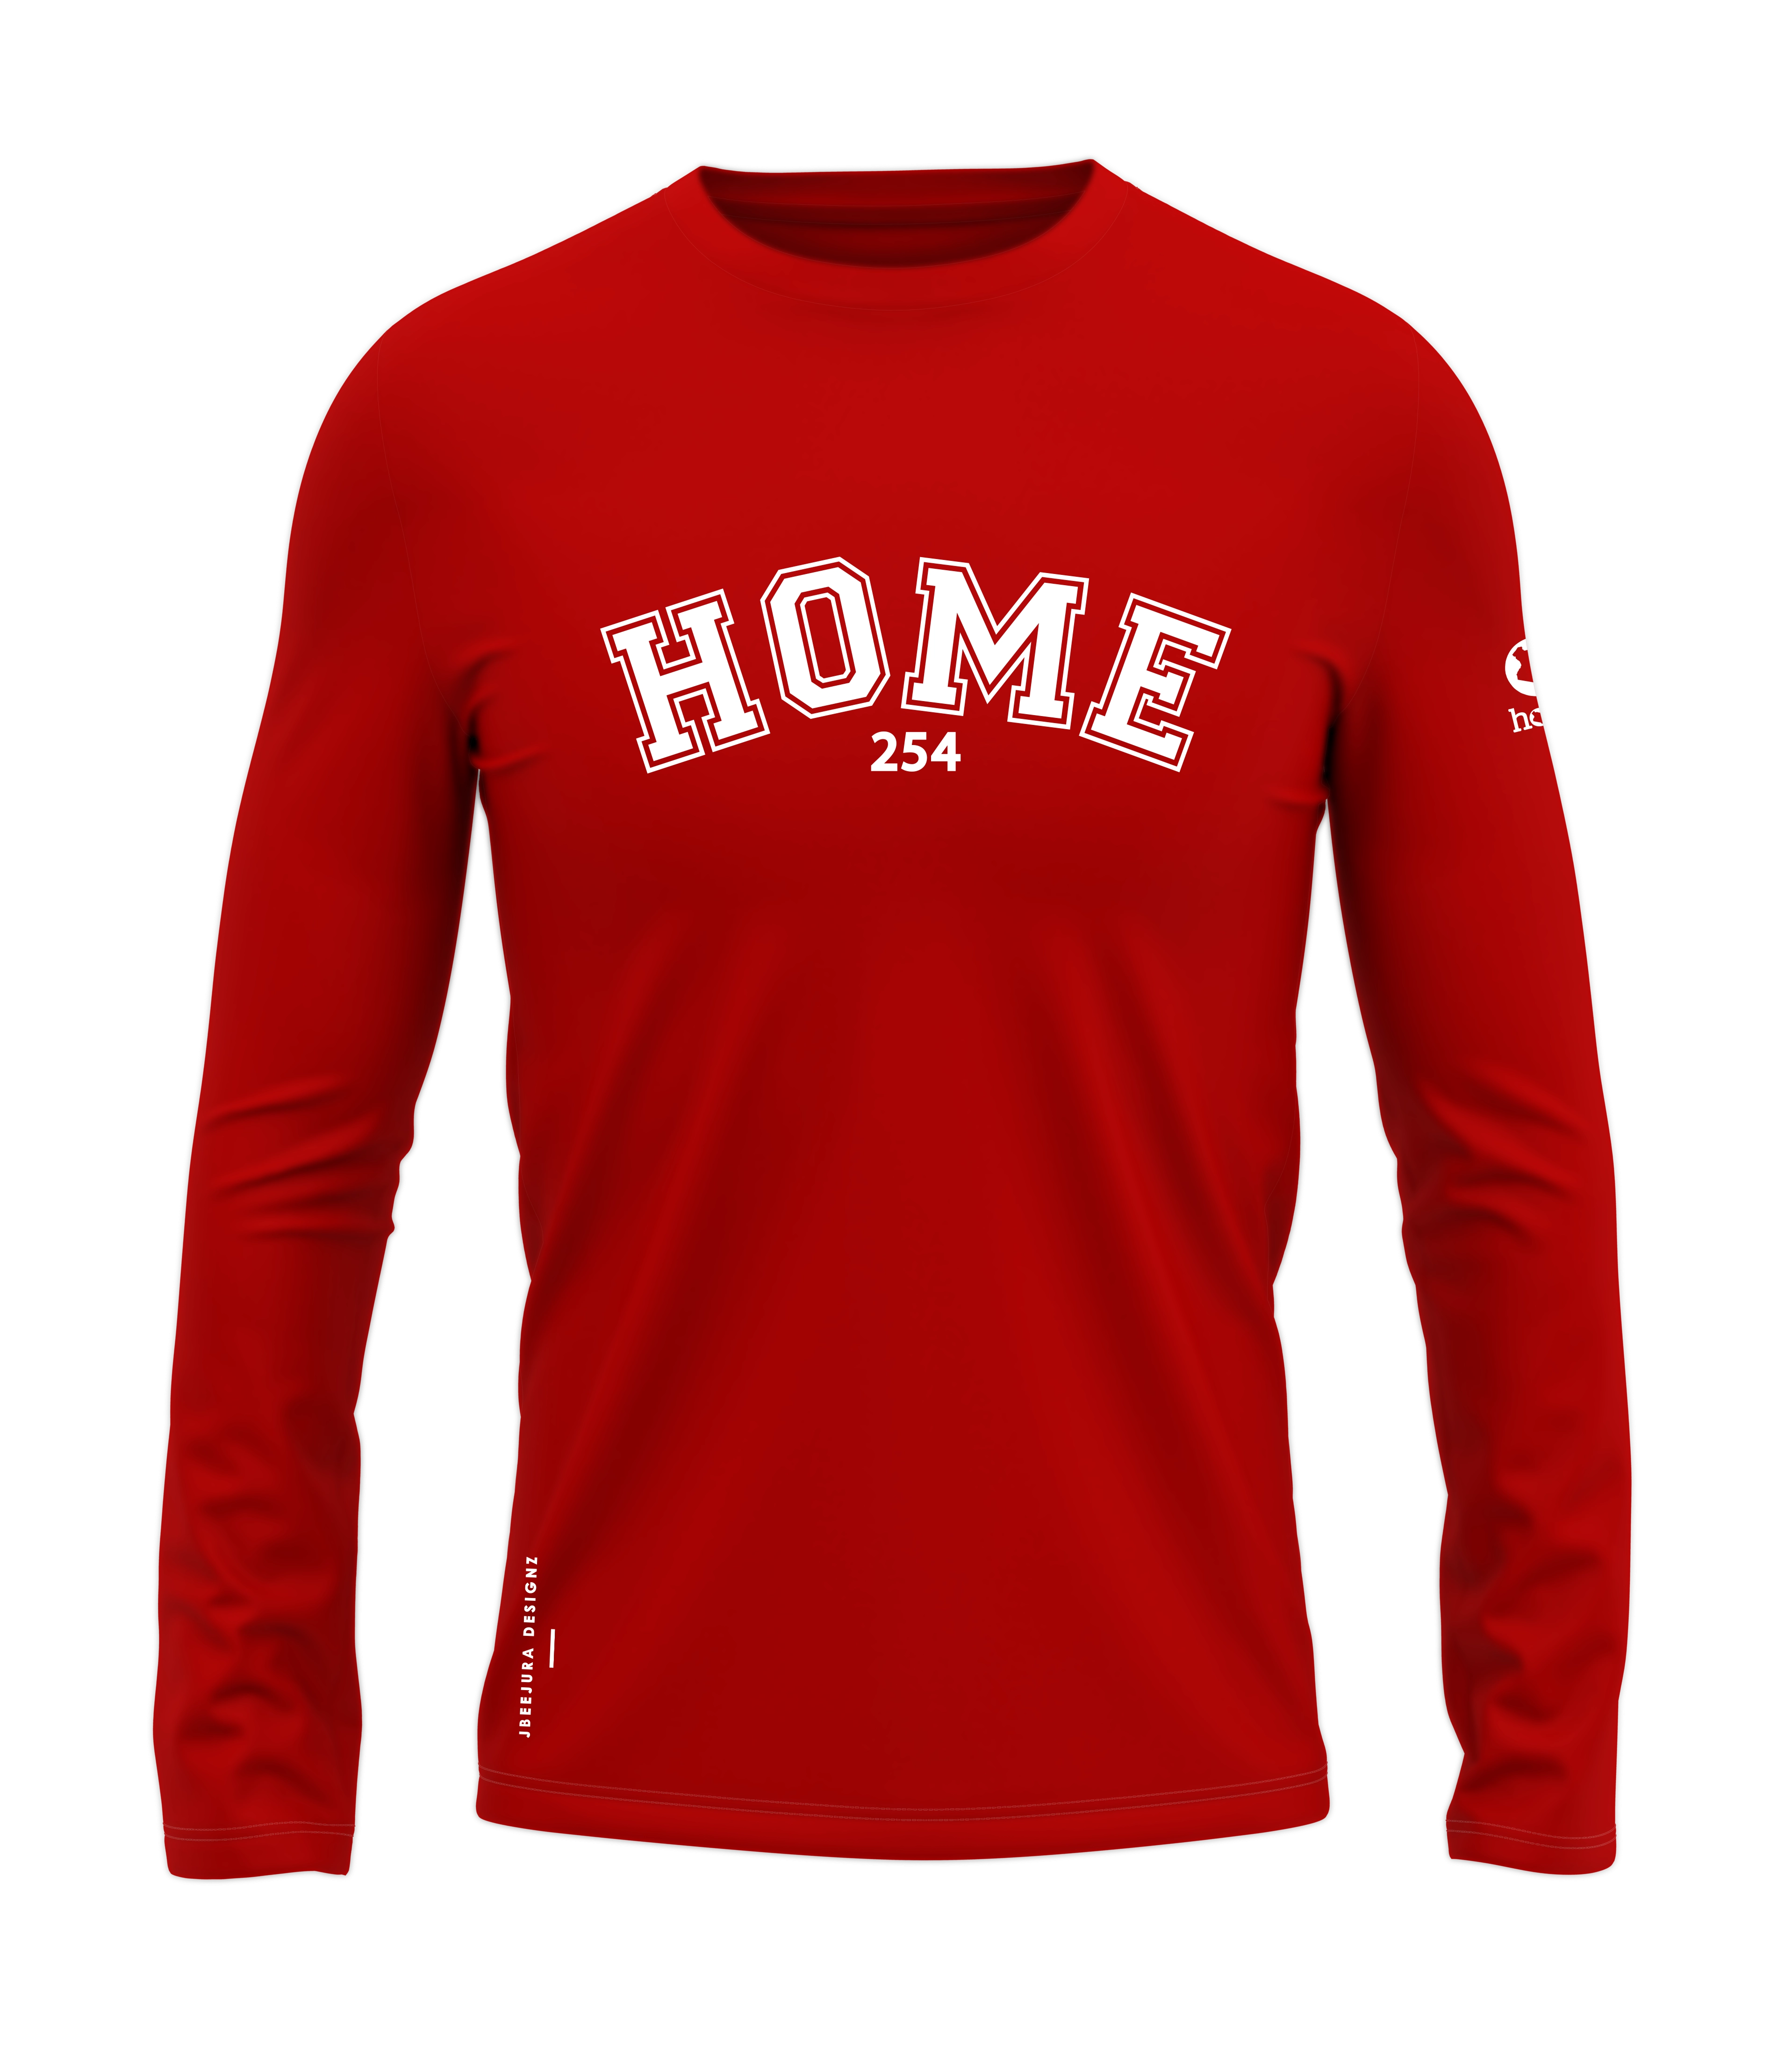 home_254 LONG-SLEEVED RED T-SHIRT WITH A WHITE COLLEGE PRINT – COTTON PLUS FABRIC